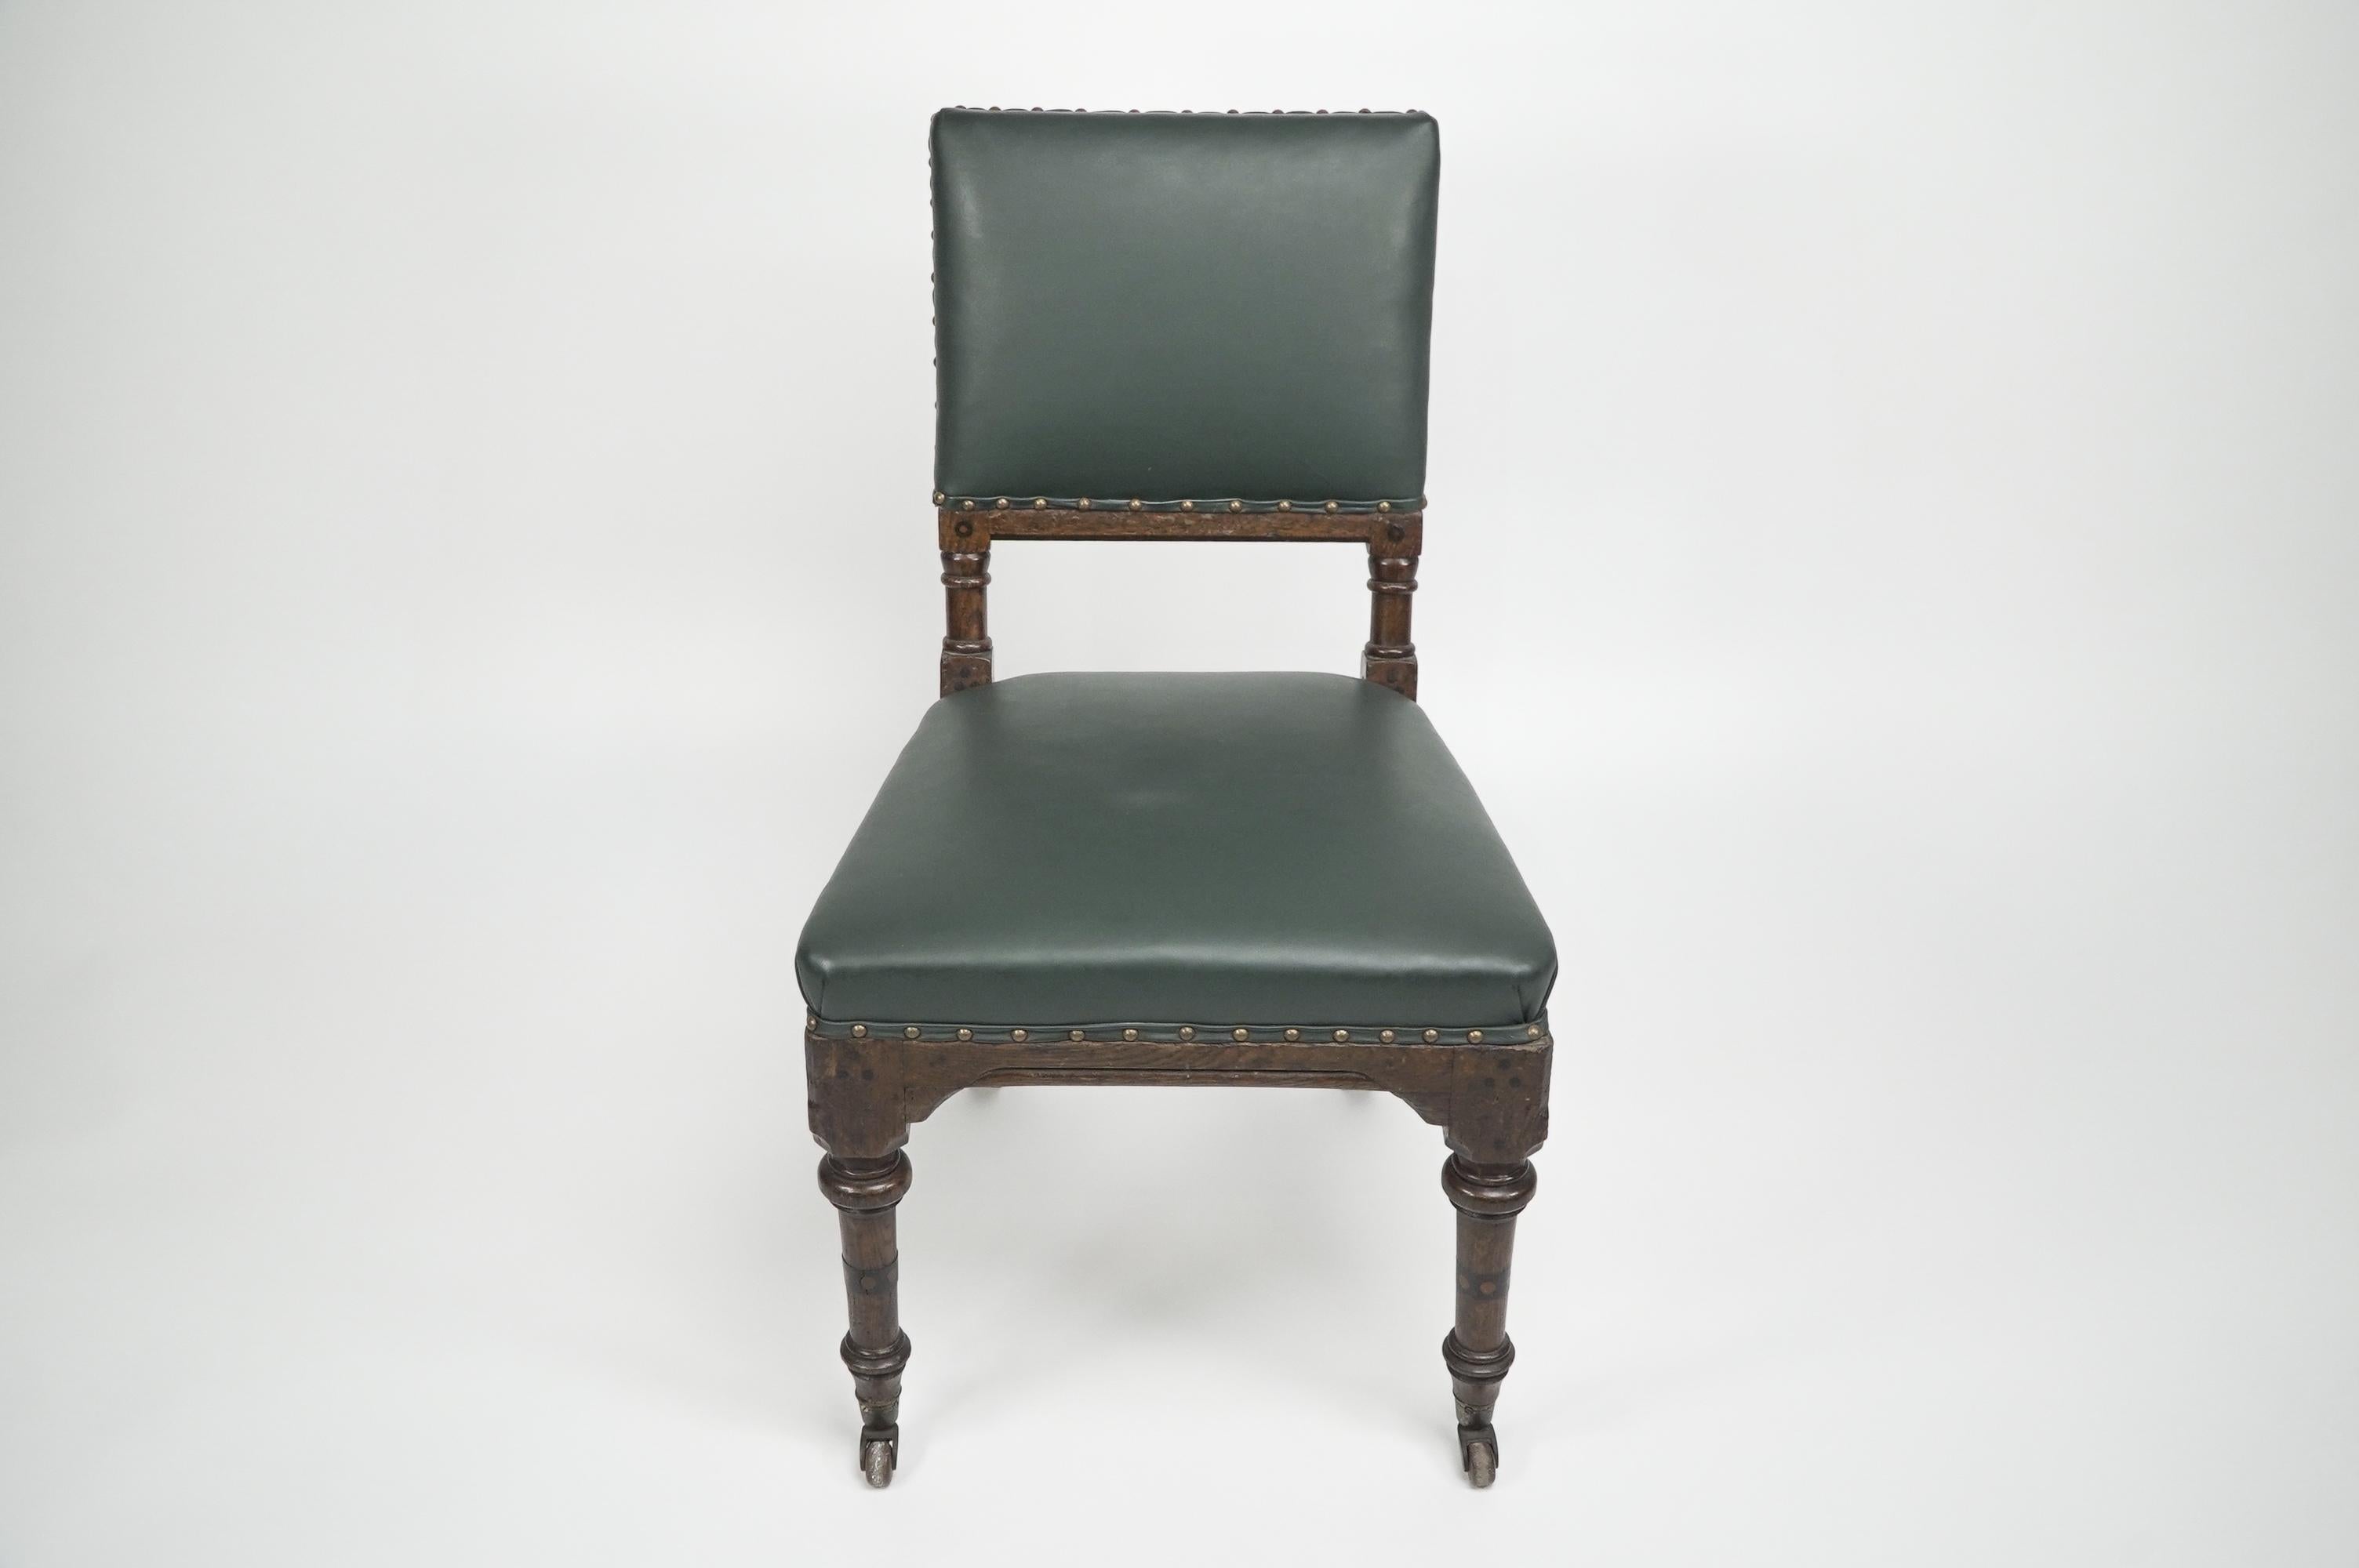 Gothic Revival Charles Bevan attributed. A gothic Revival side chair with chamfered edges For Sale